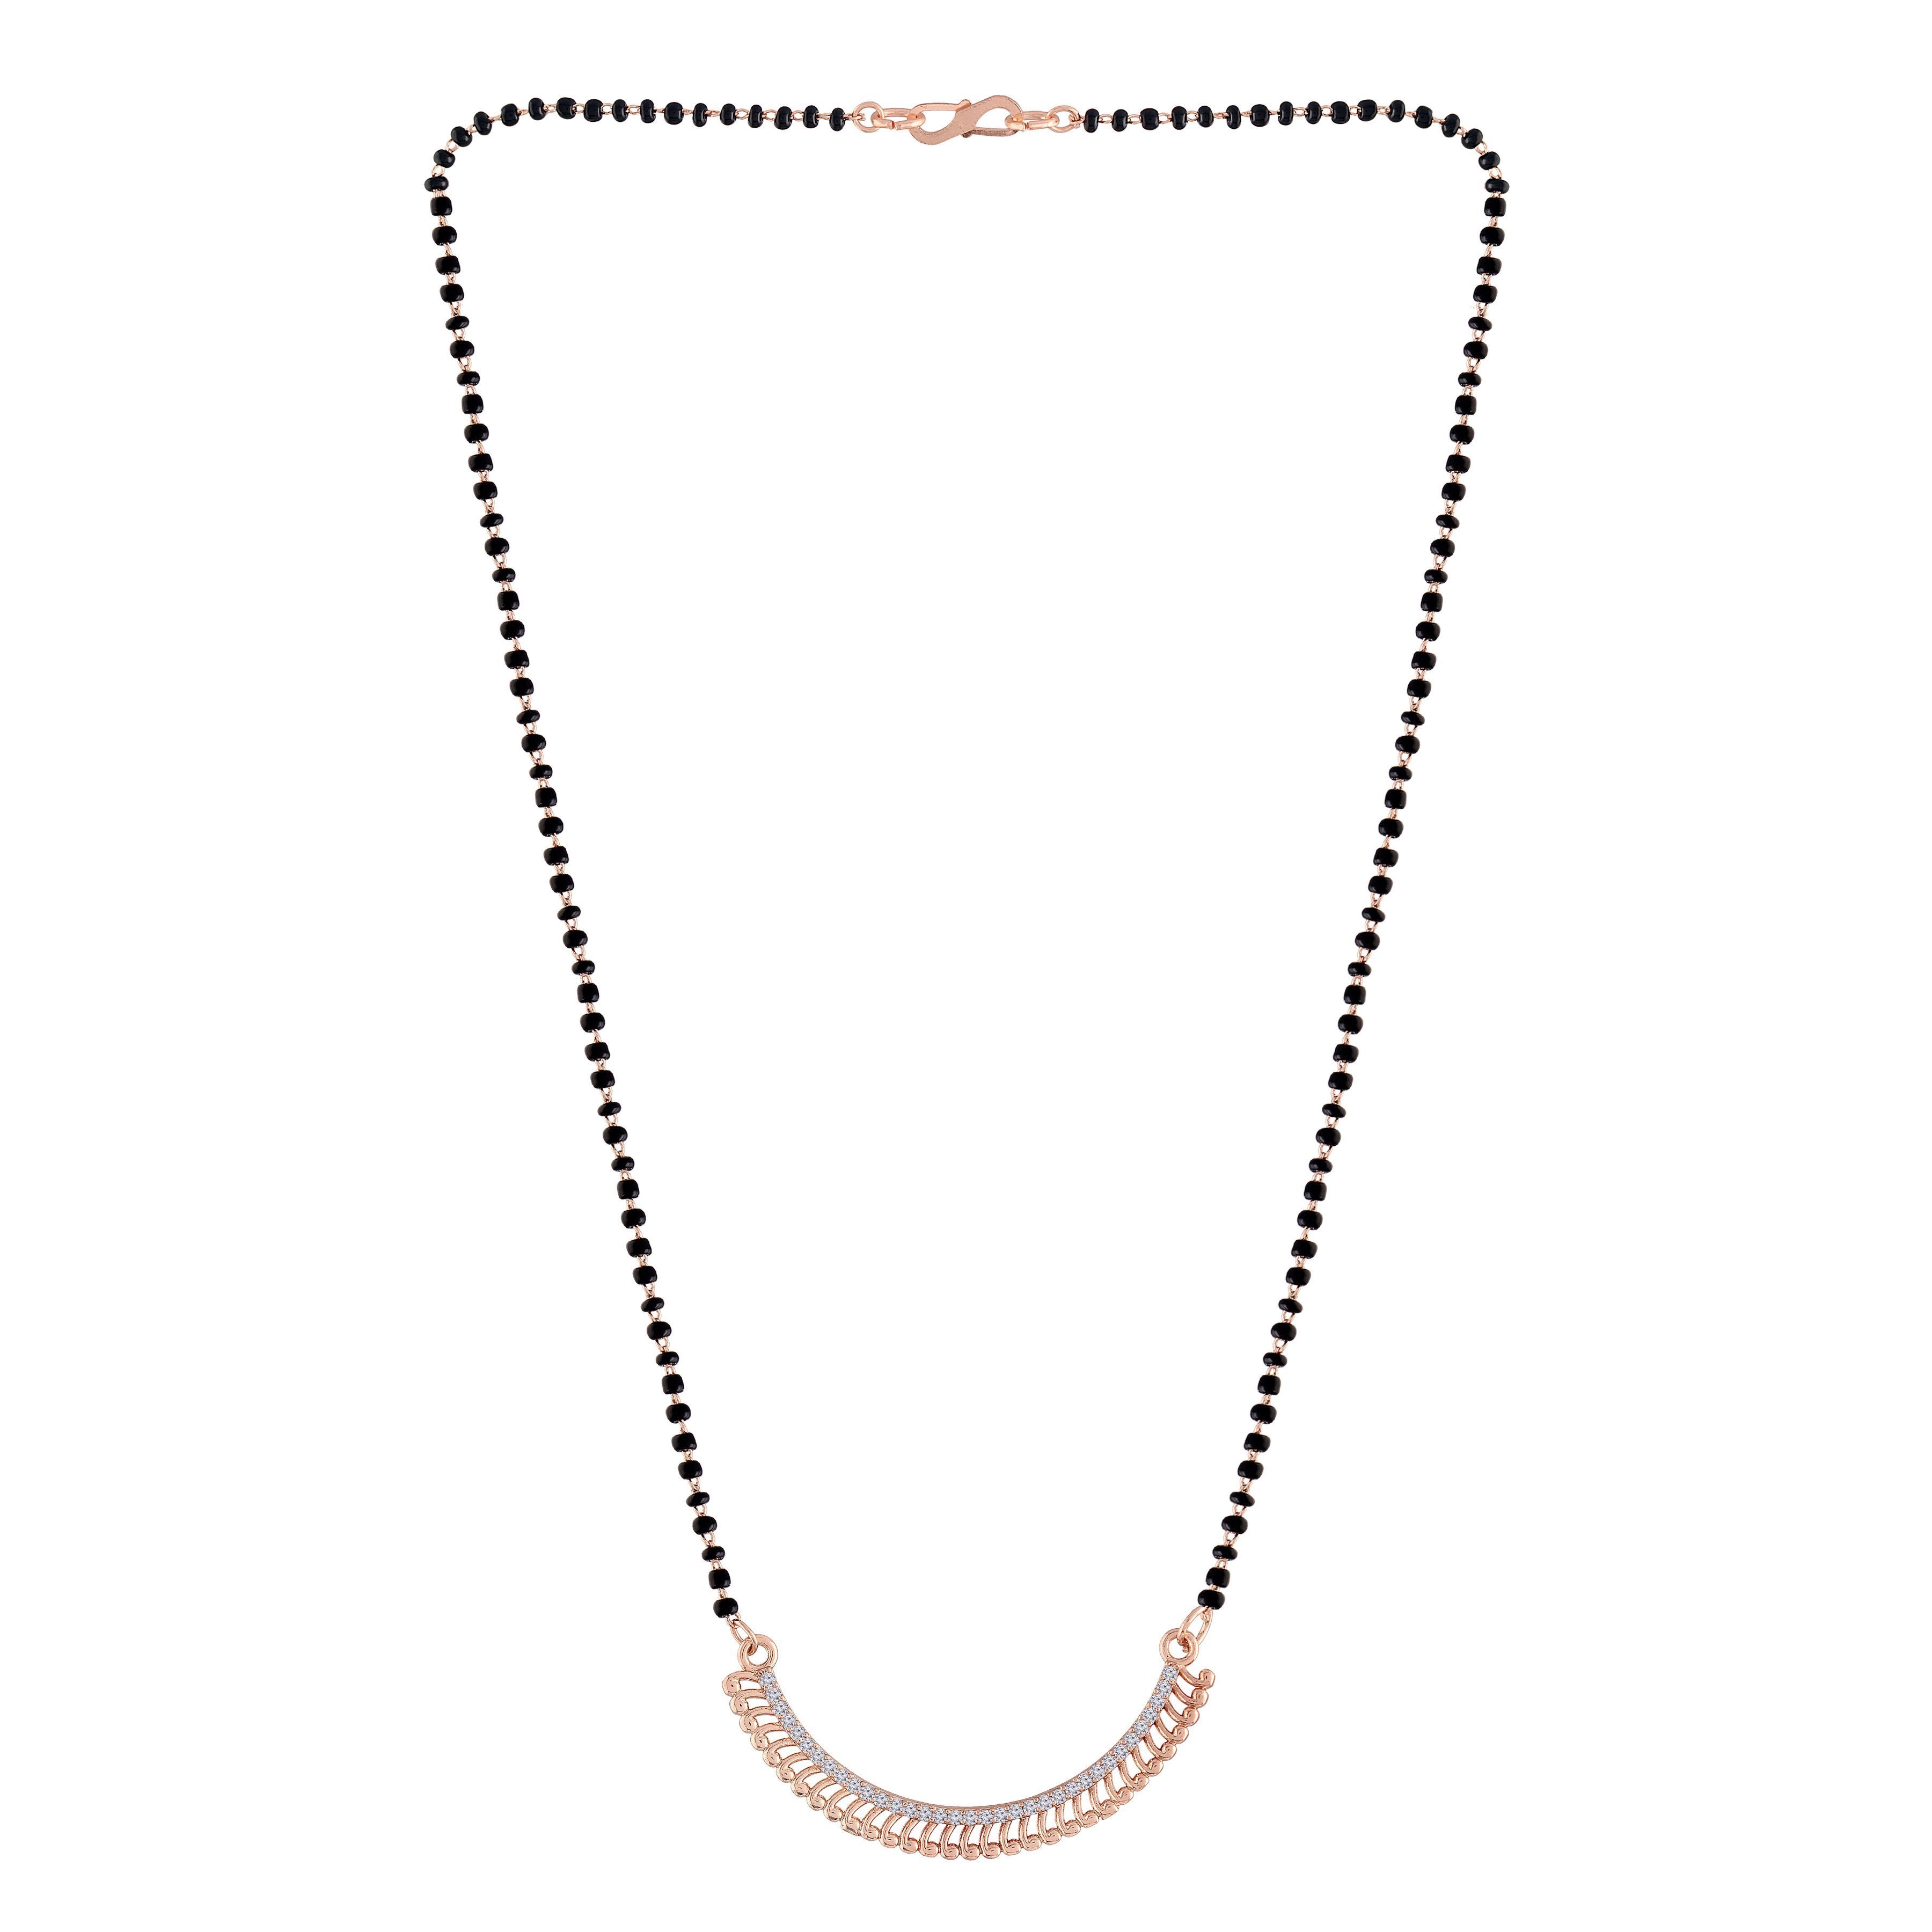 Women's 18k Rose Gold Plated Pendant with Black Bead Chain Mangalsutra - I Jewels